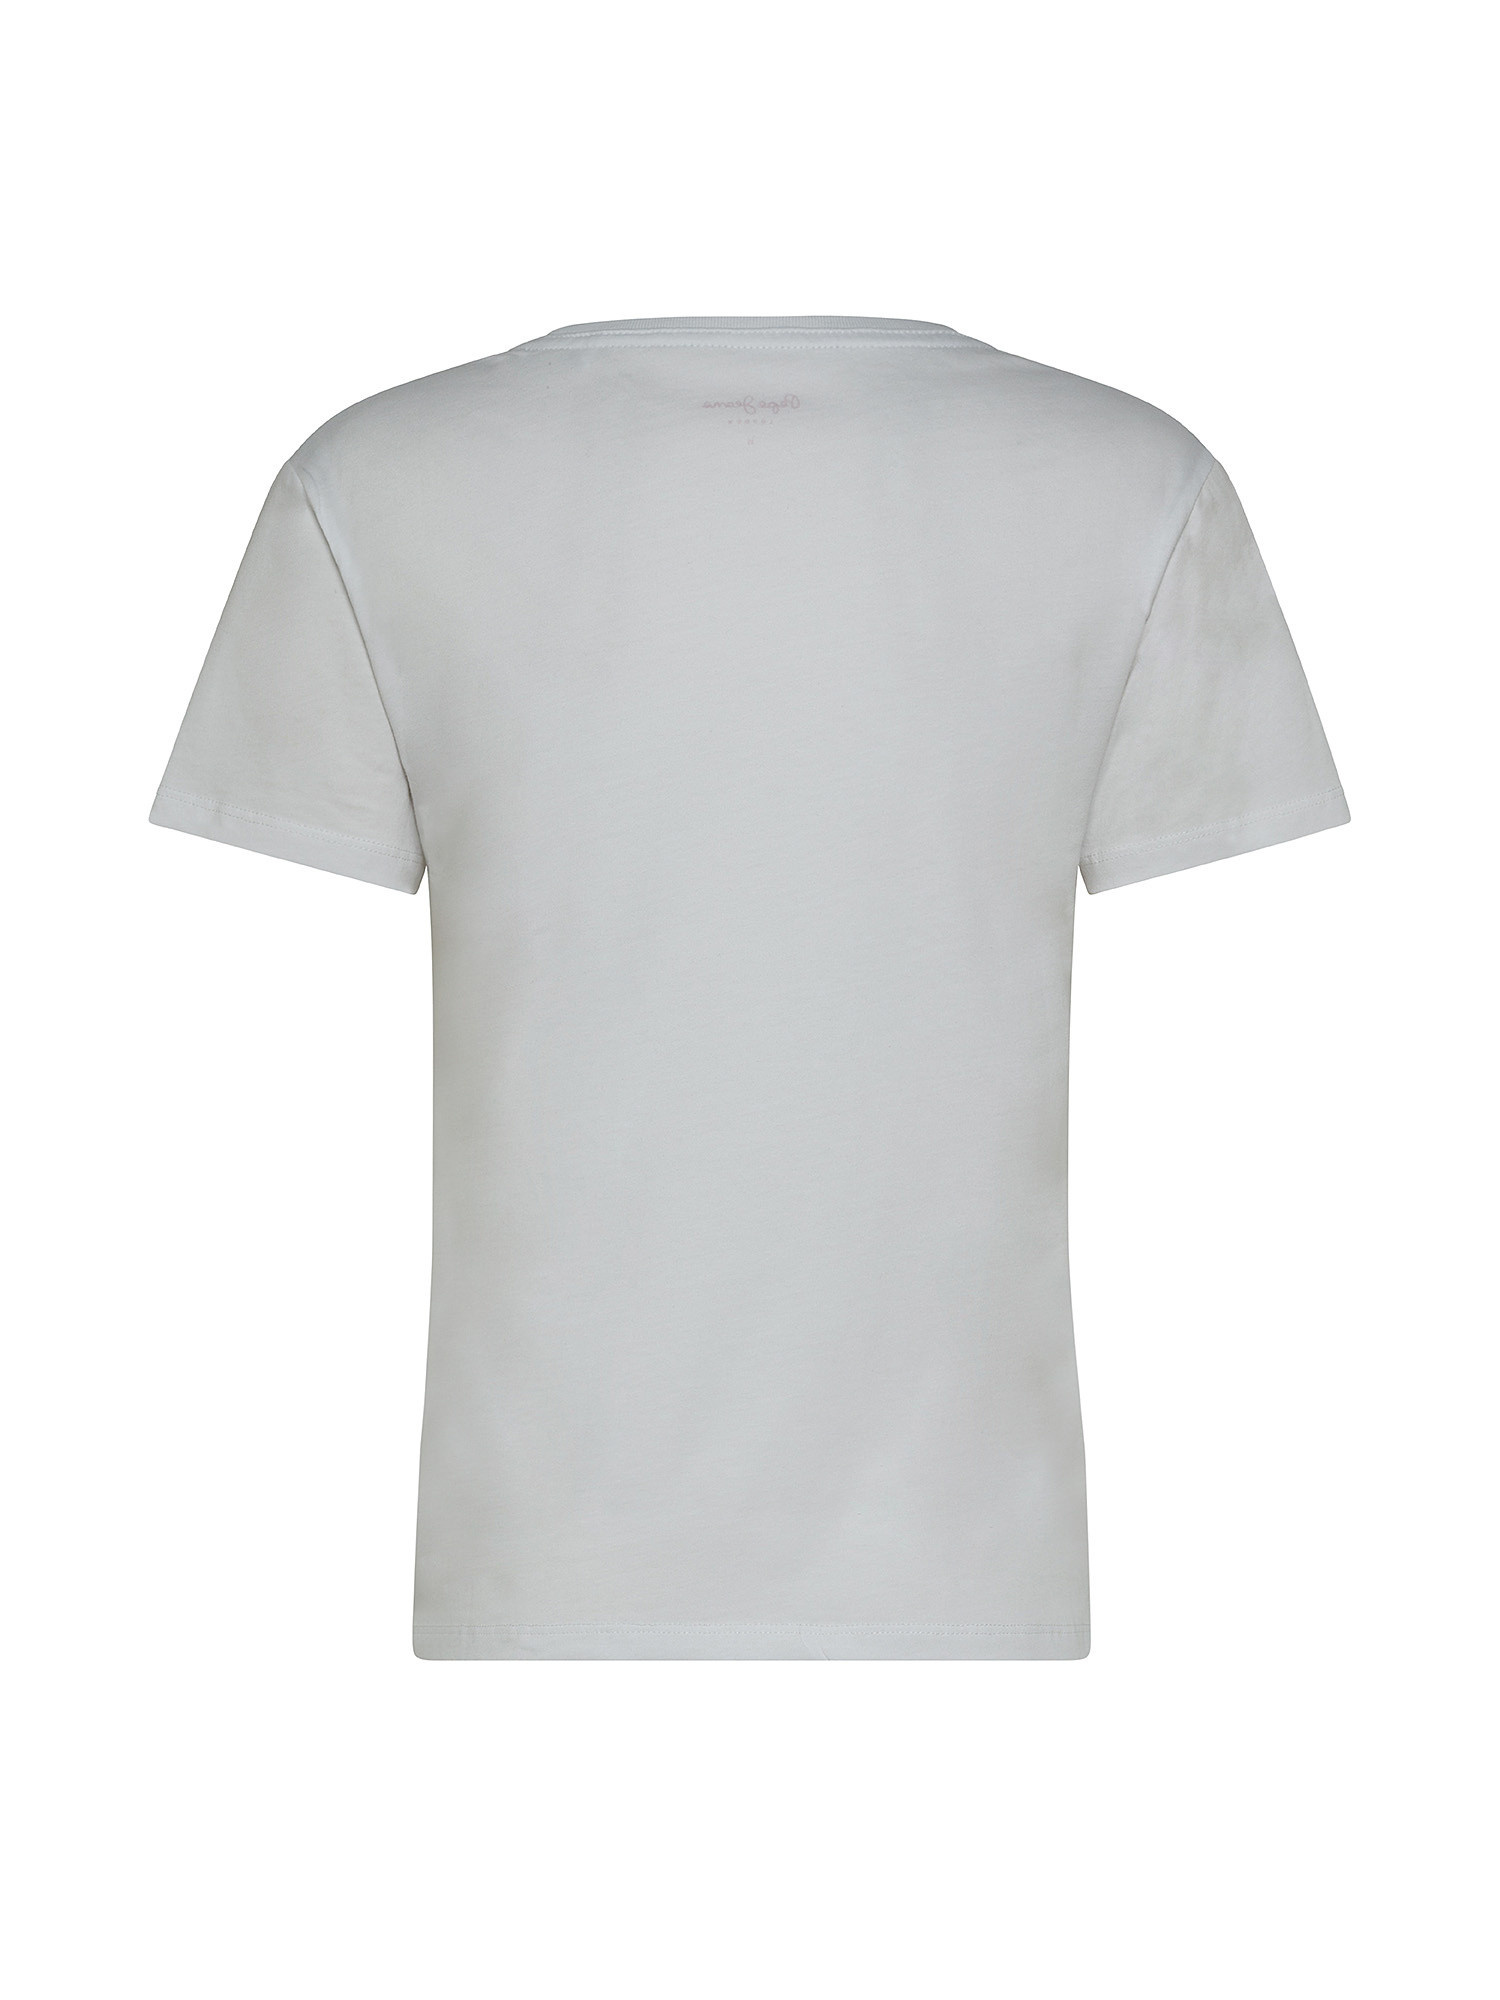 T-shirt with printed logo, White, large image number 1